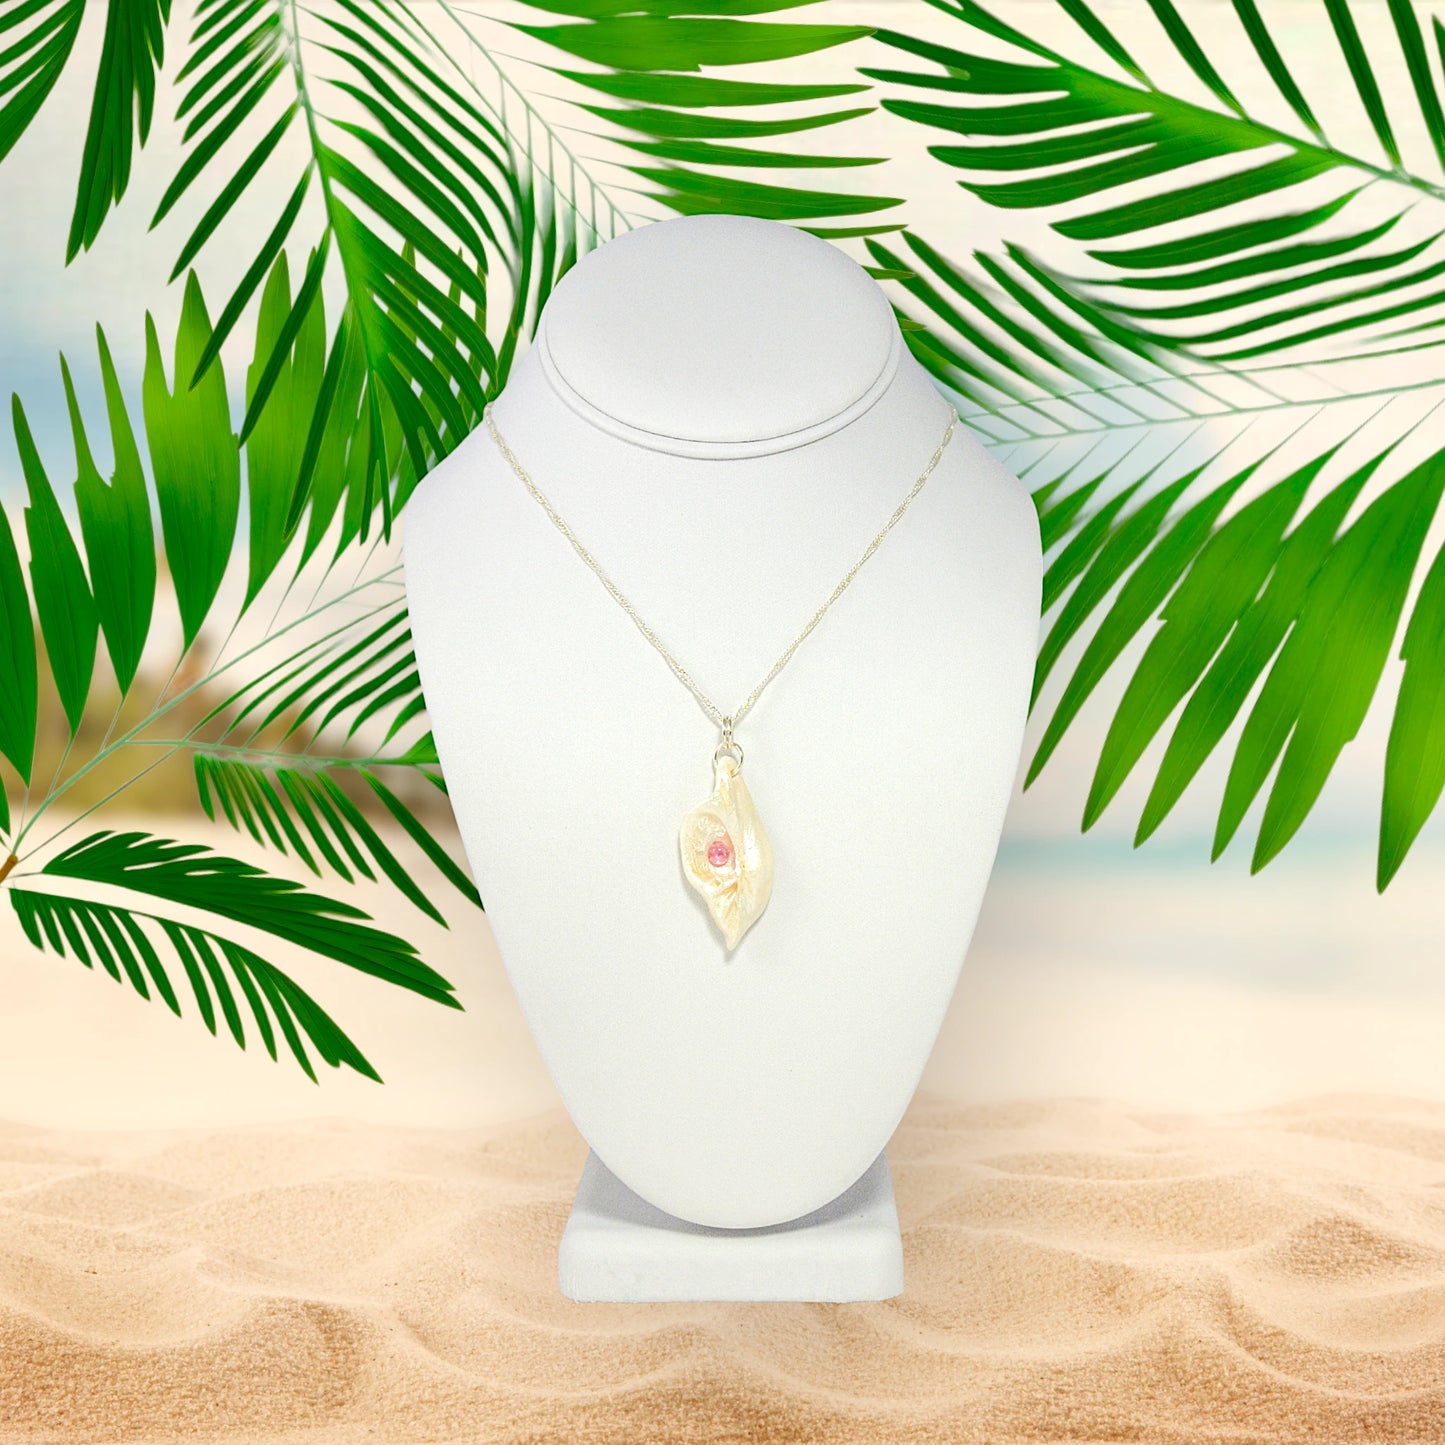 This natural seashell pendant has Pink Tourmaline gemstone and three Herkimer Diamonds that compliments the pendant. The pendant is shown on a white necklace displayer on the sandy beach with greenery.